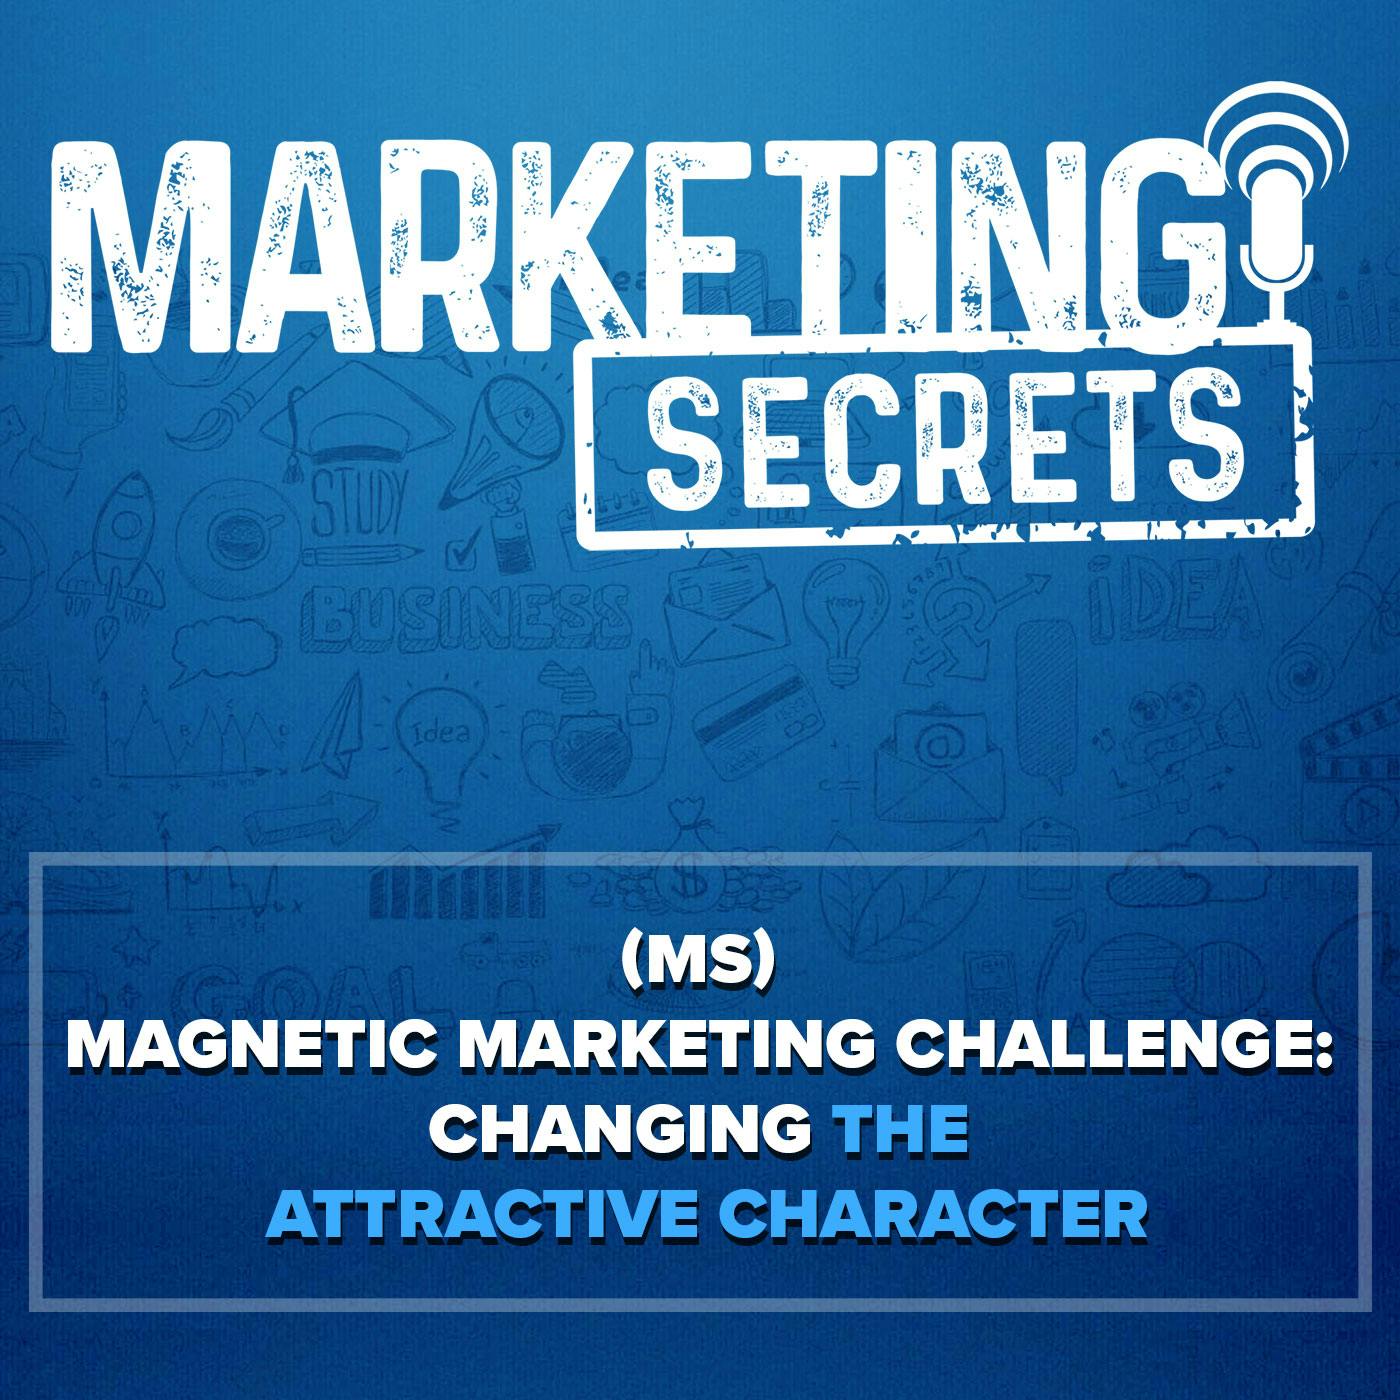 (MS) Magnetic Marketing Challenge: Changing The Attractive Character